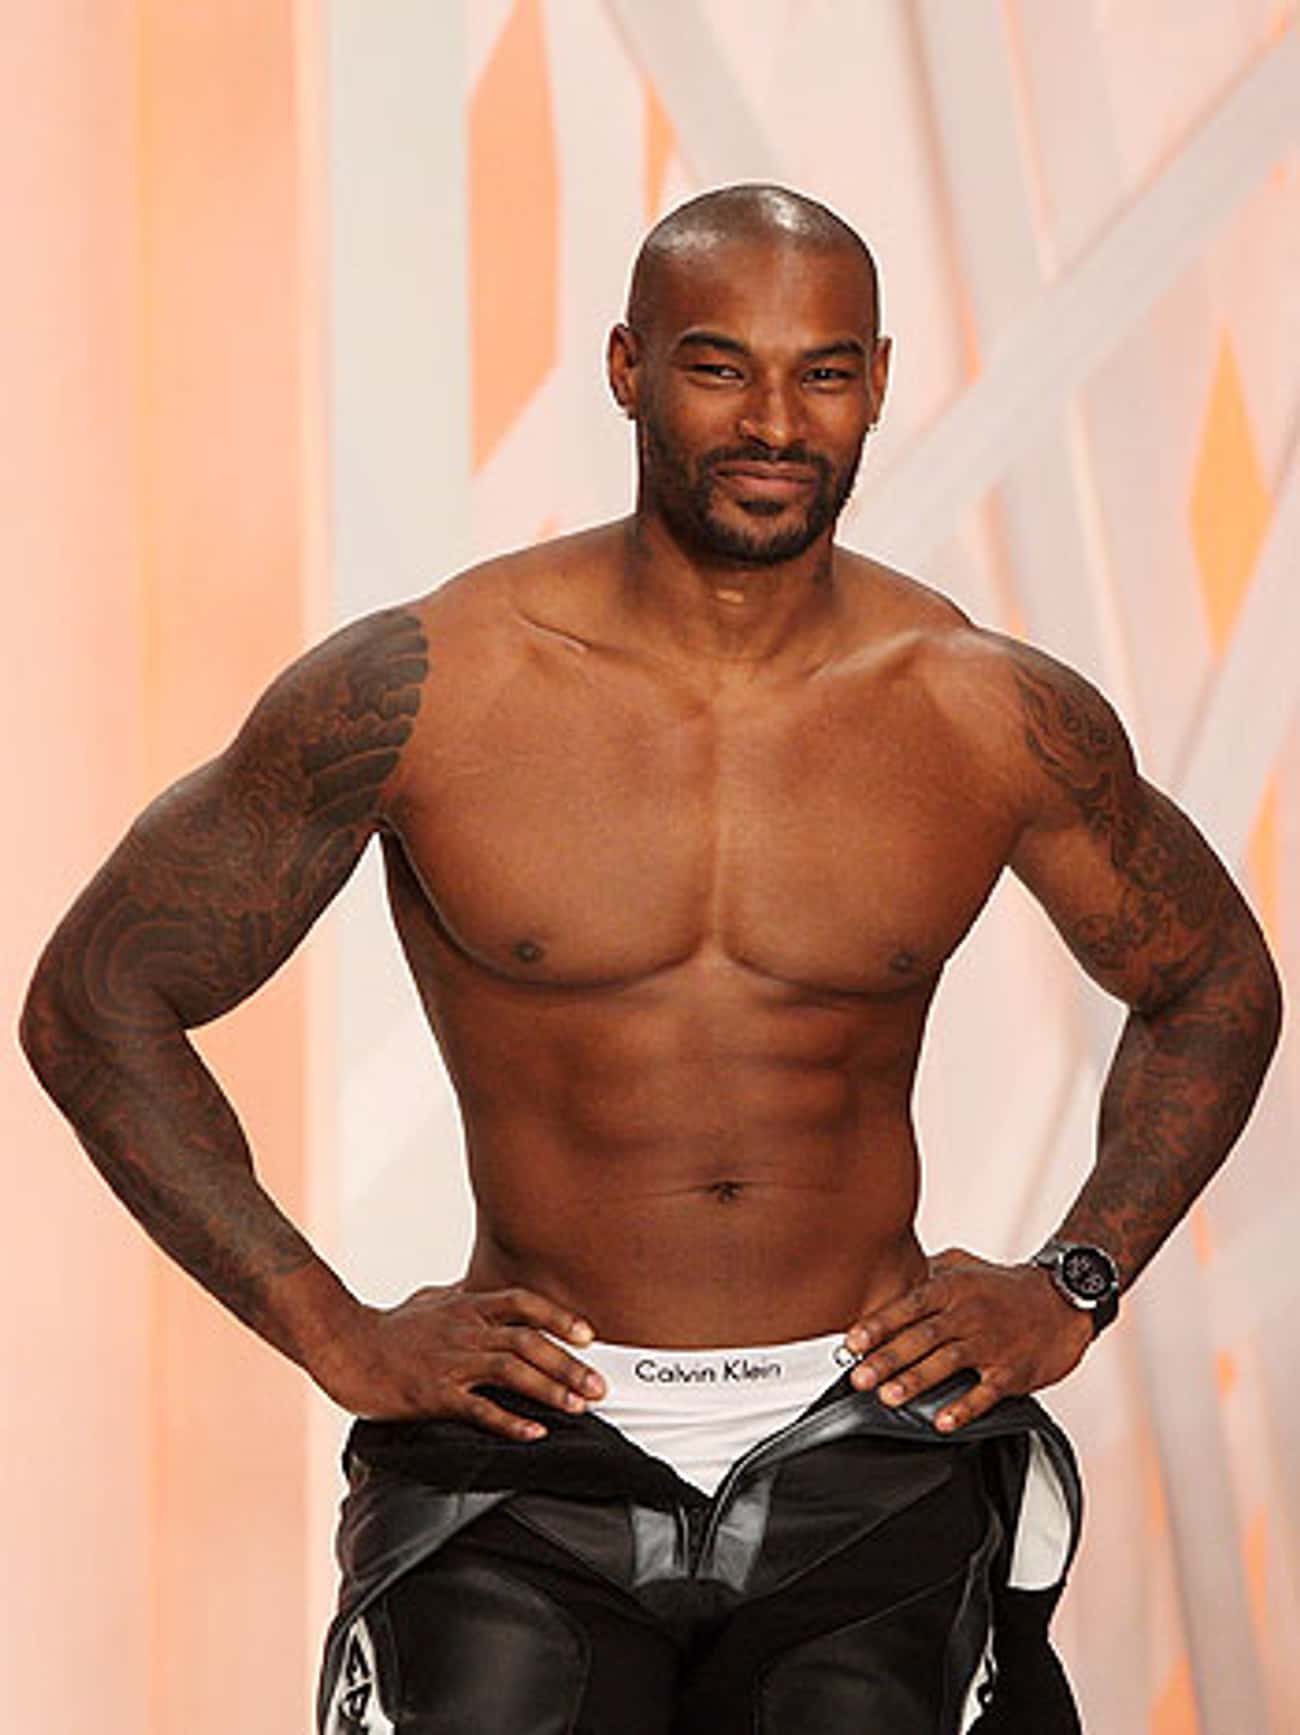 Tyson Beckford in Scuba Diver Outfit